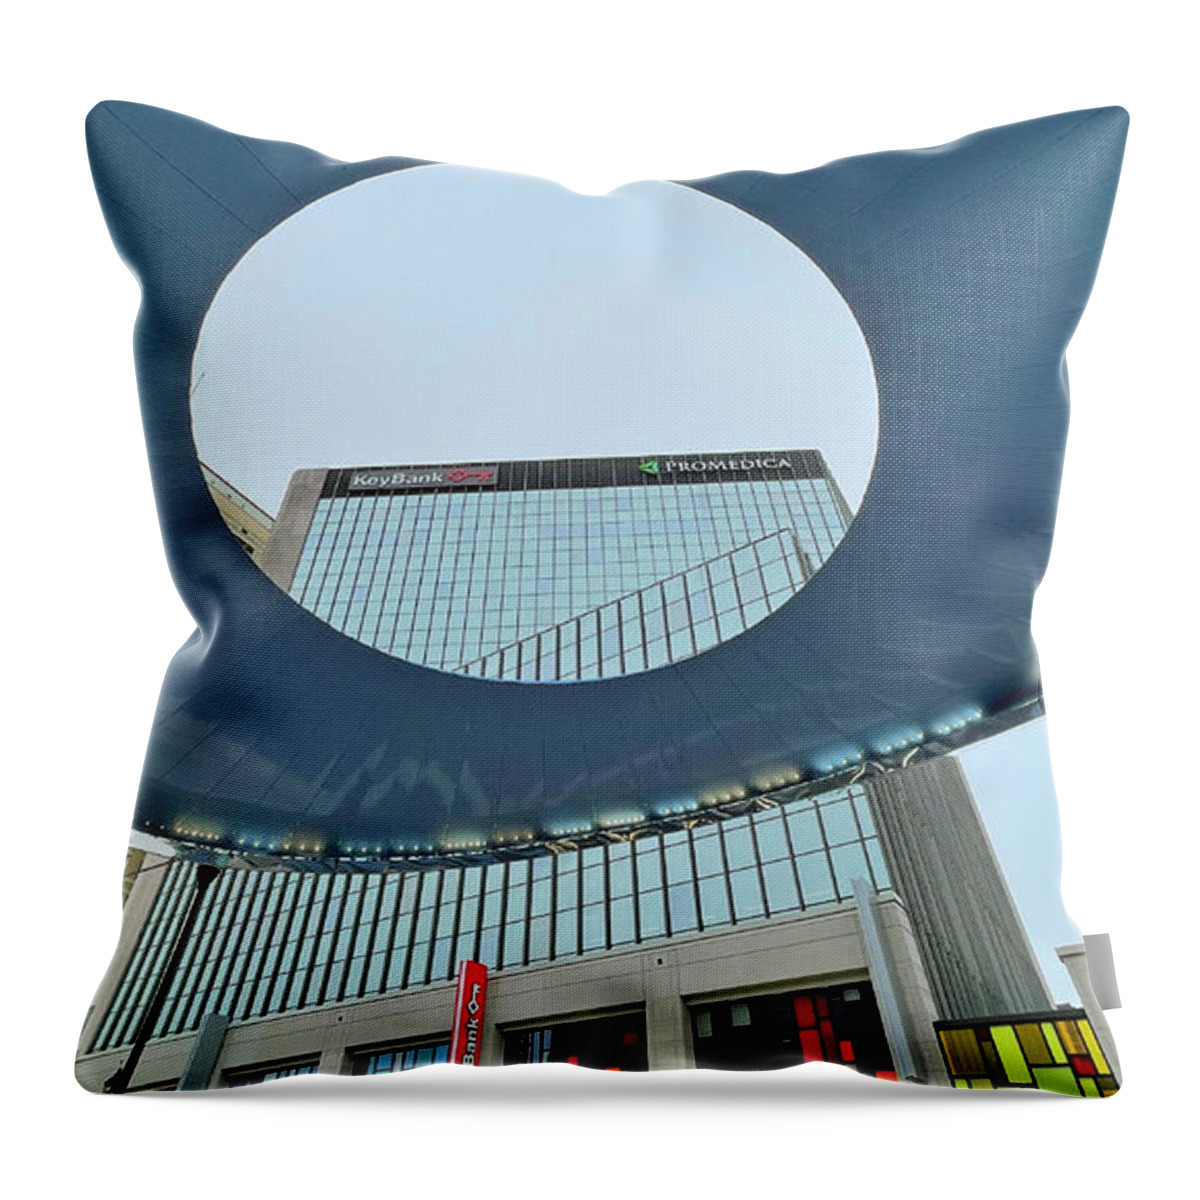 Upon Reflection Throw Pillow featuring the photograph Upon Reflection Artwork Downtown Toledo Ohio 4394 by Jack Schultz